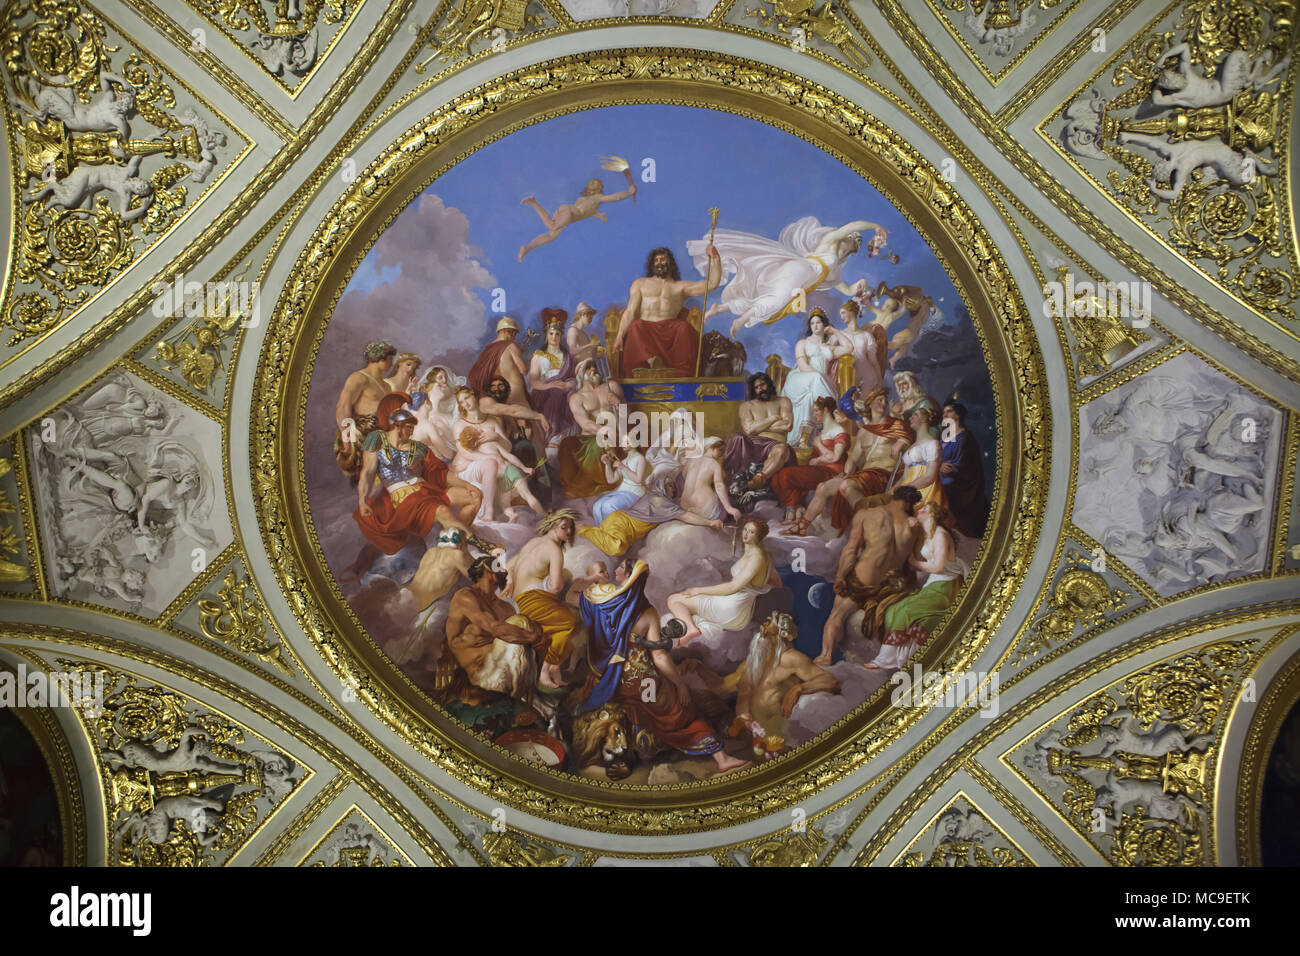 Assembly of the gods presided over by Jupiter on Mount Olympus. Plafond paining by Italian painter Luigi Sabatelli in the Iliad Room in the Palatine Gallery (Galleria Palatina) in the Palazzo Pitti in Florence, Tuscany, Italy. Stock Photo